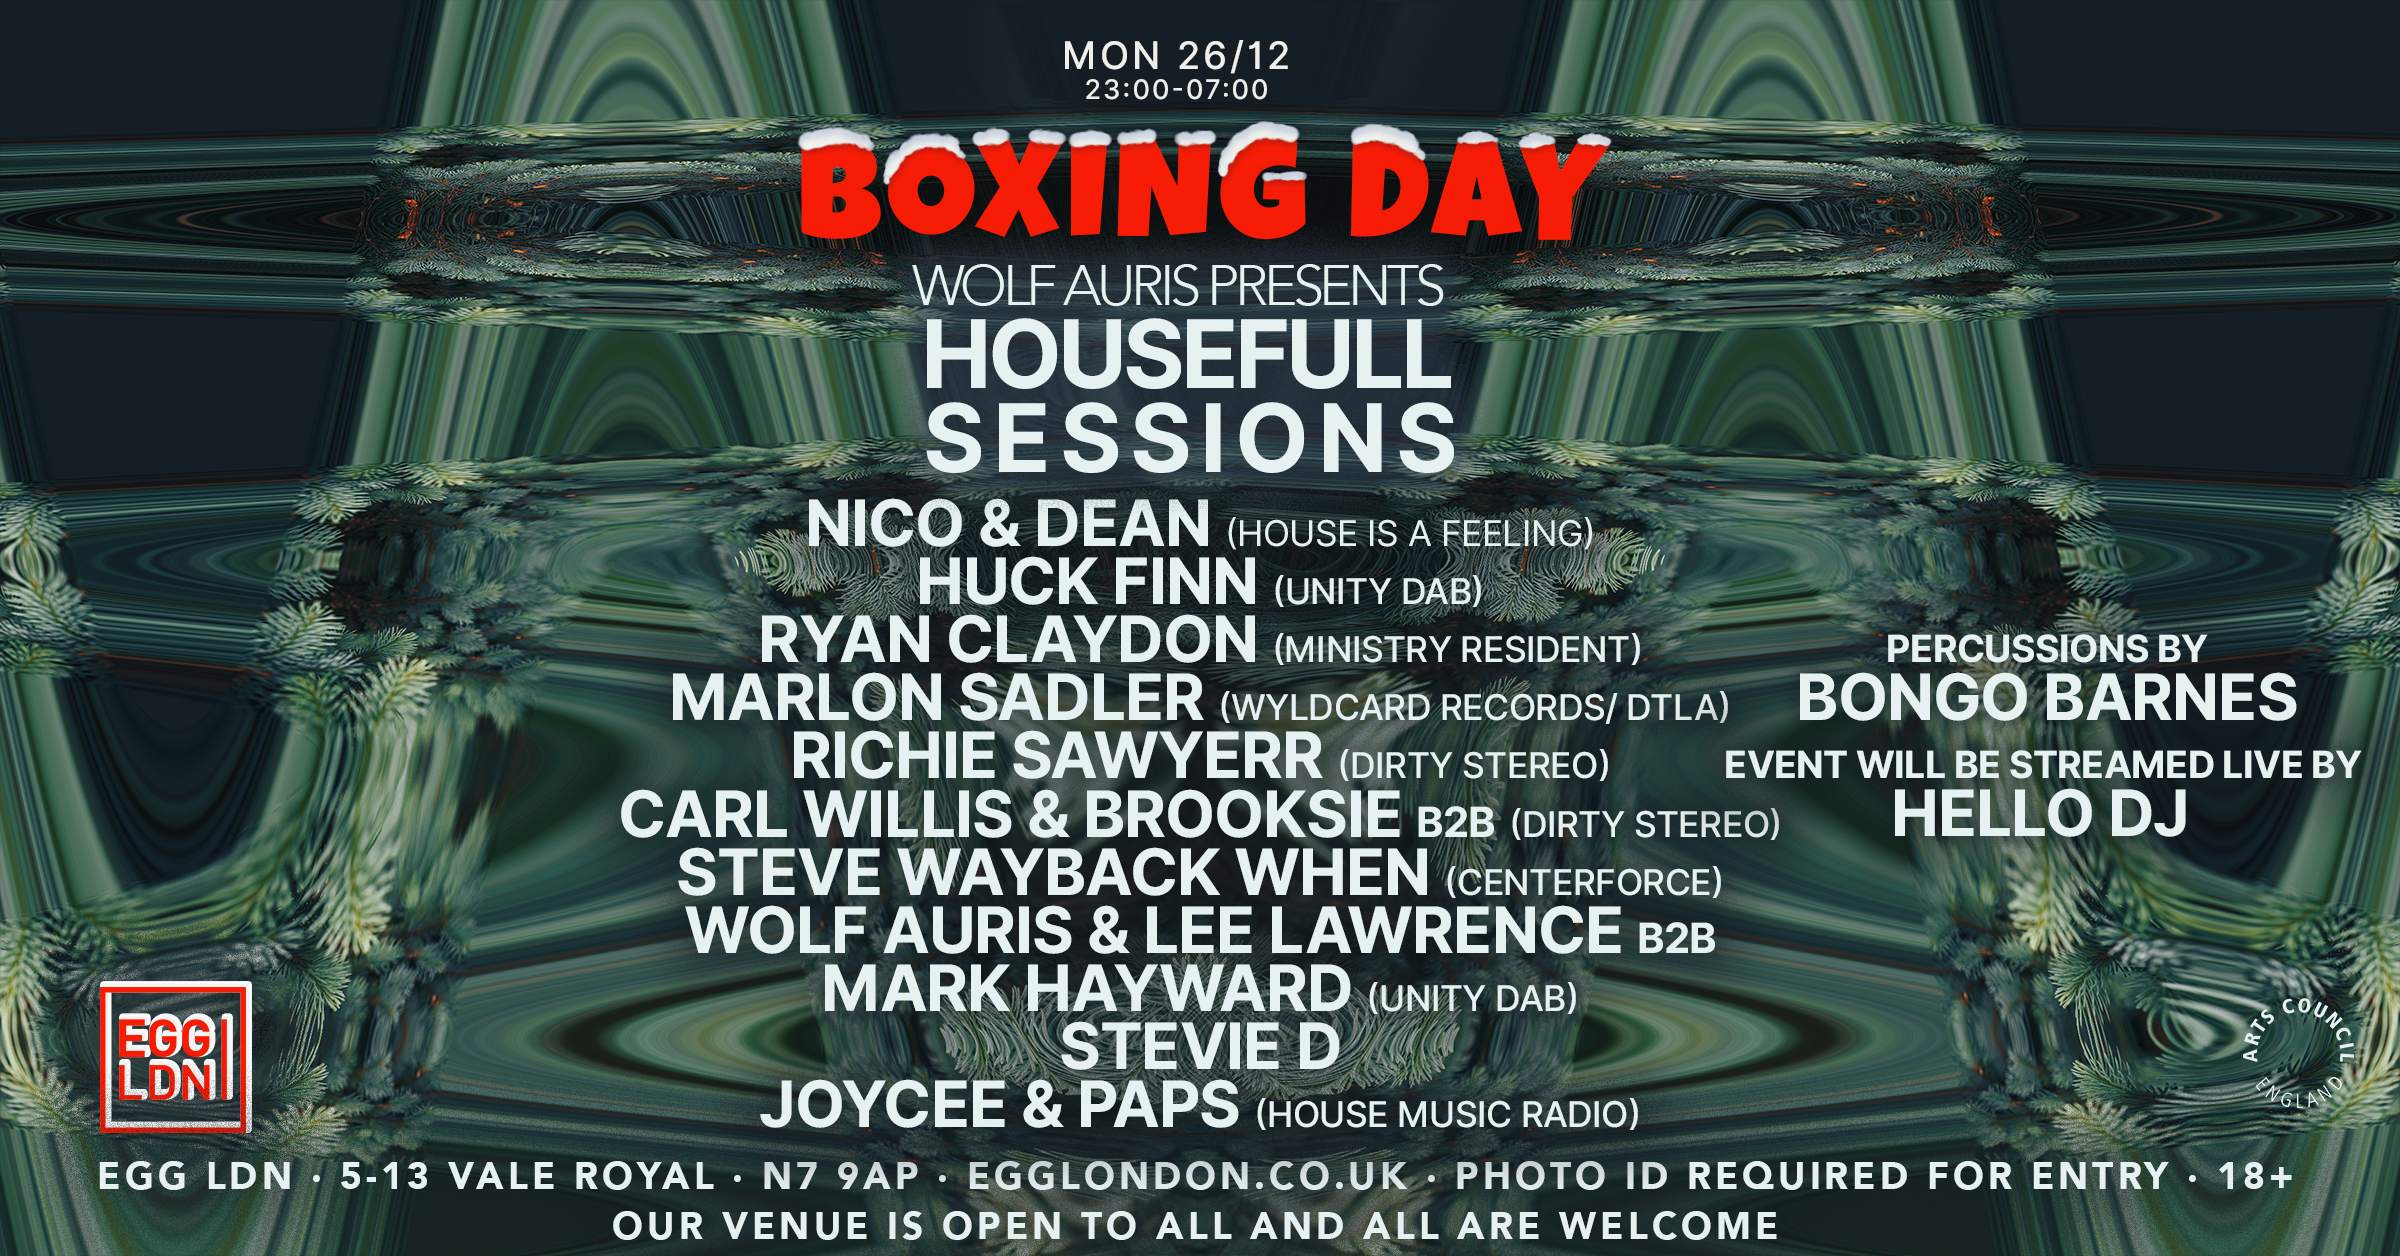 Egg LDN Pres: Boxing Day Special / Wolf Auris presents Housefull Sessions - フライヤー表